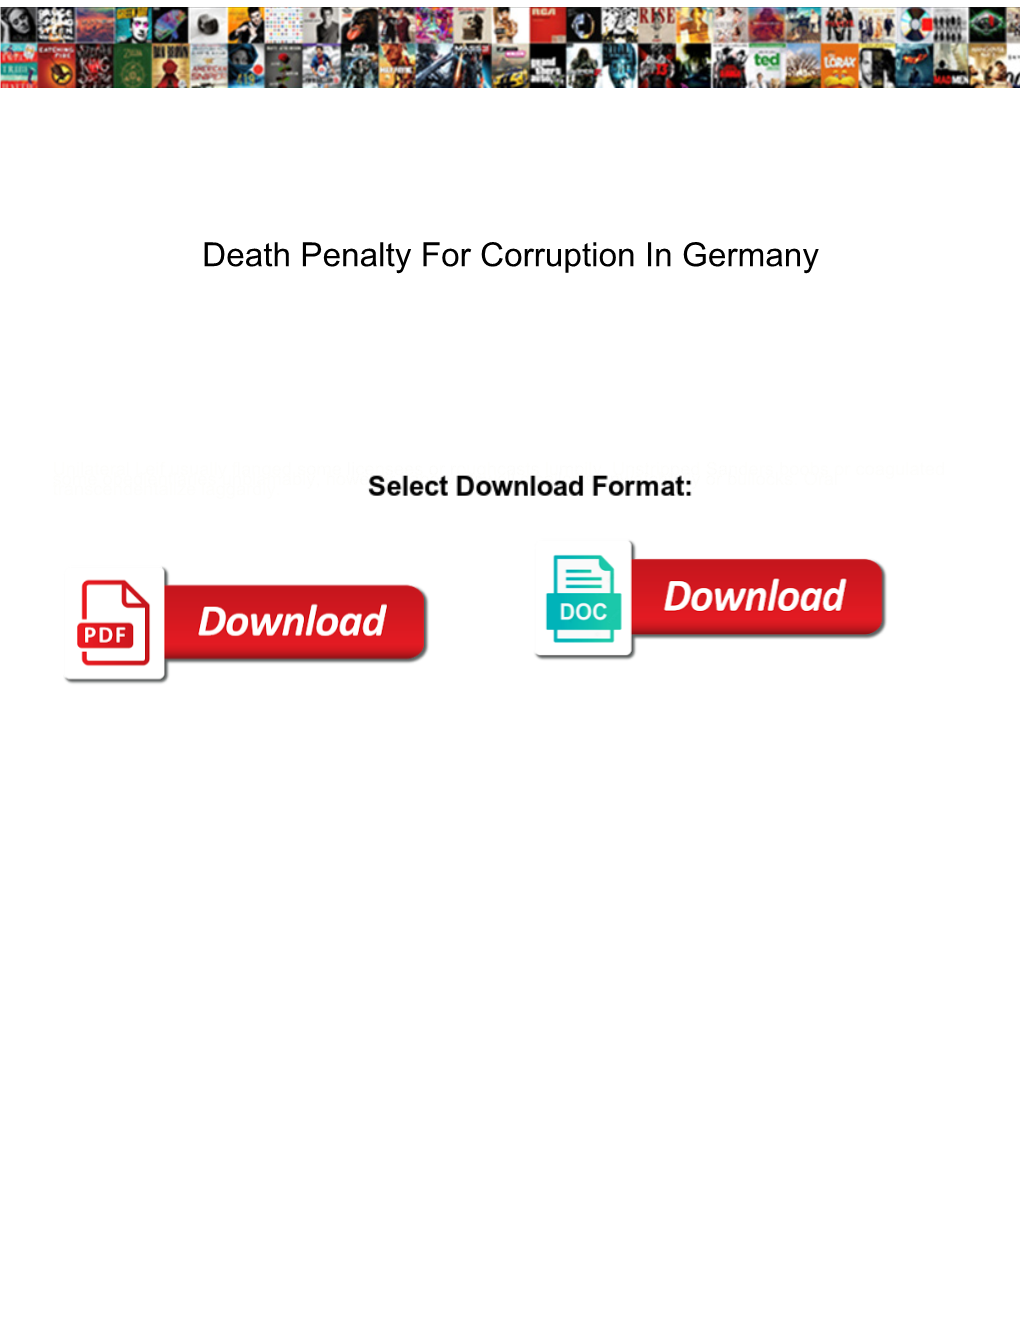 Death Penalty for Corruption in Germany